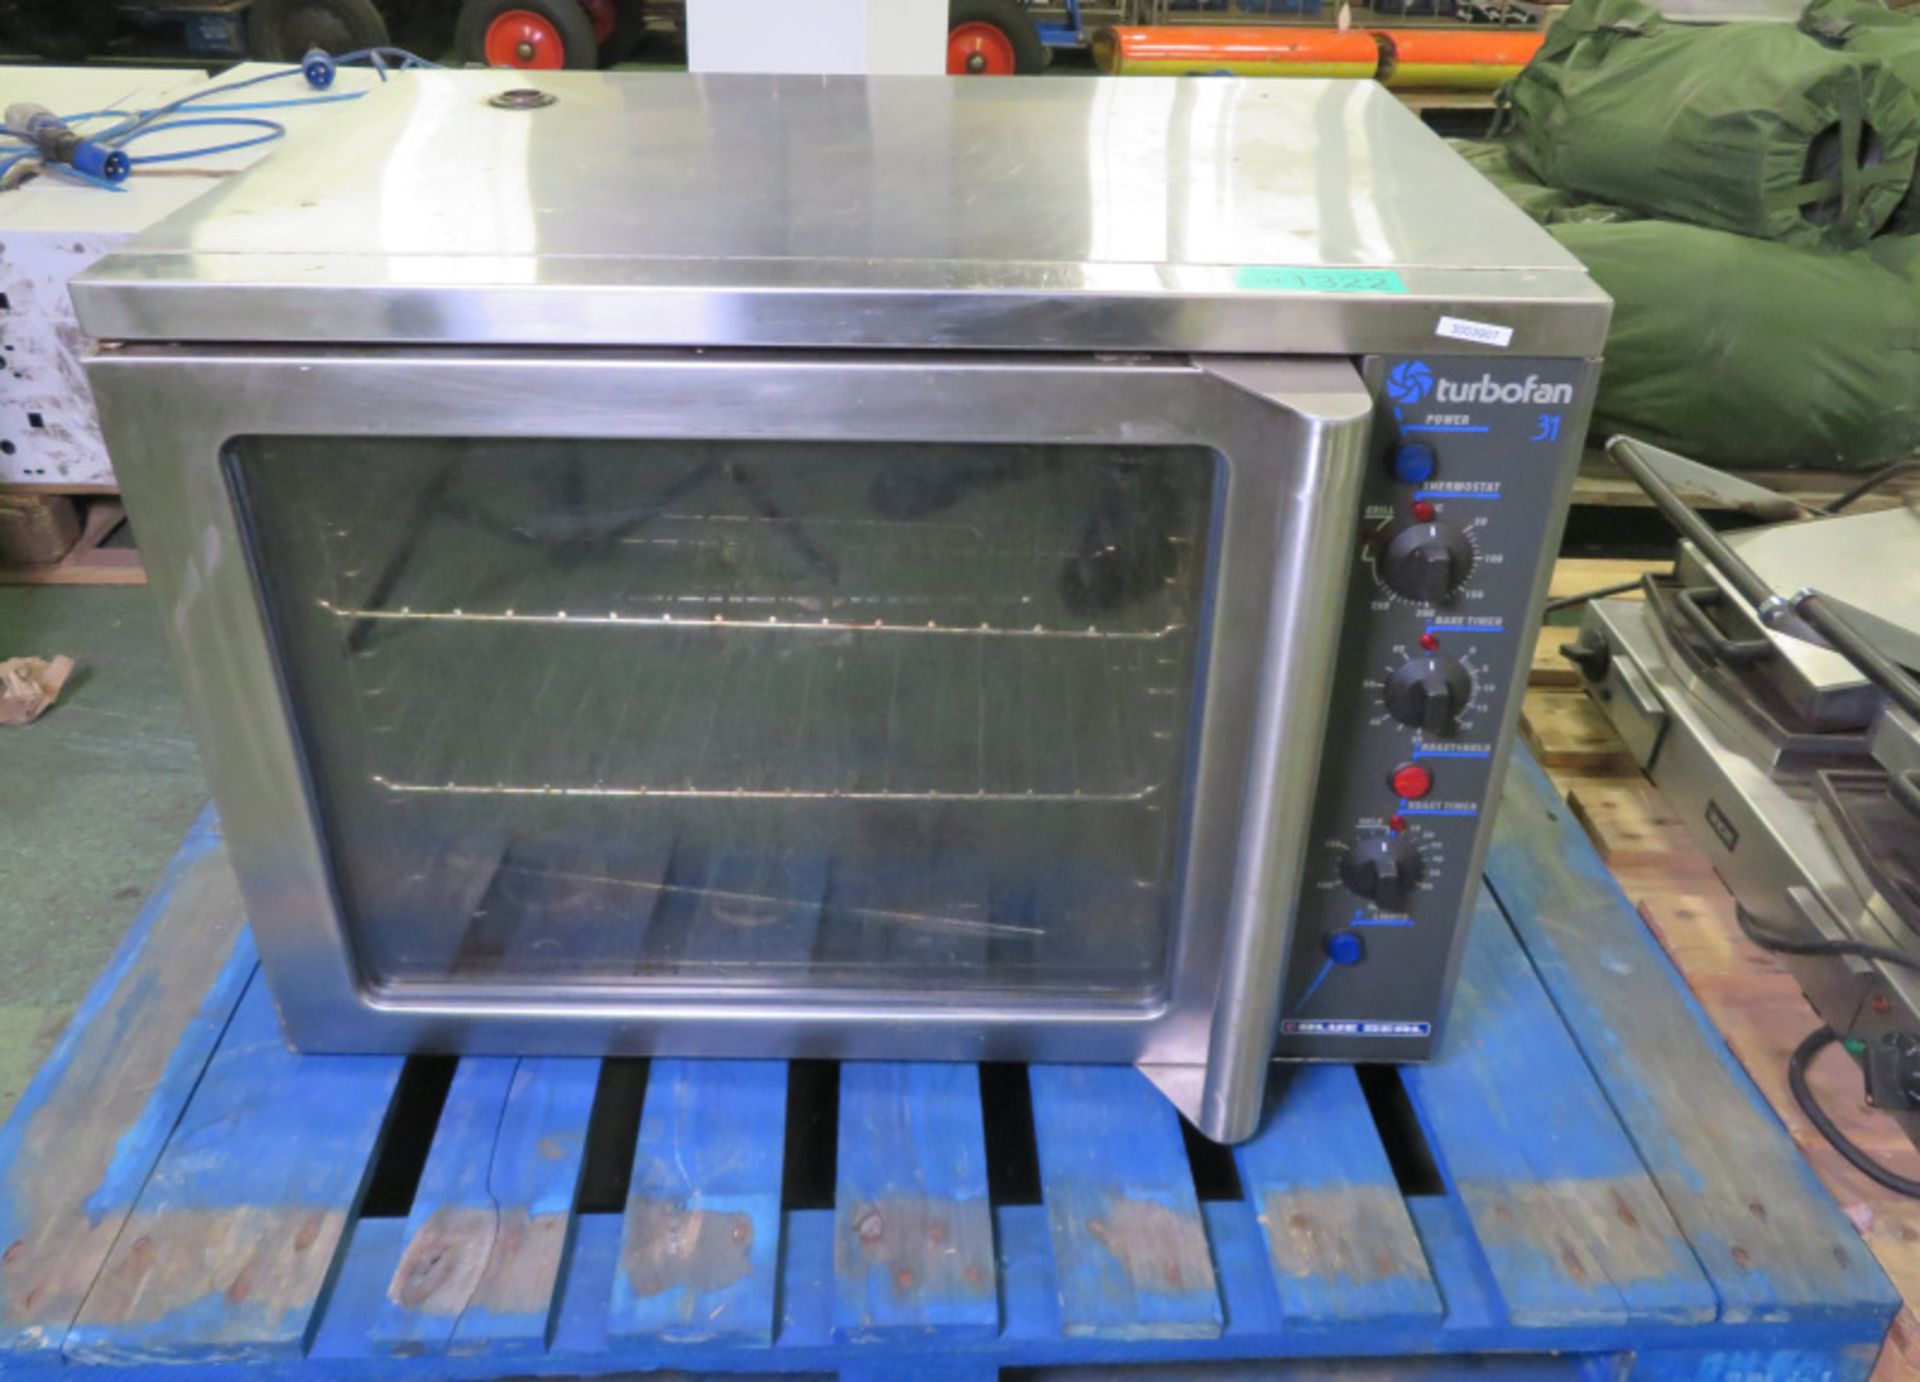 Blue Seal E33MS Turbofan Oven 240v L 800mm x W 700mm x H 580mm - Image 2 of 6